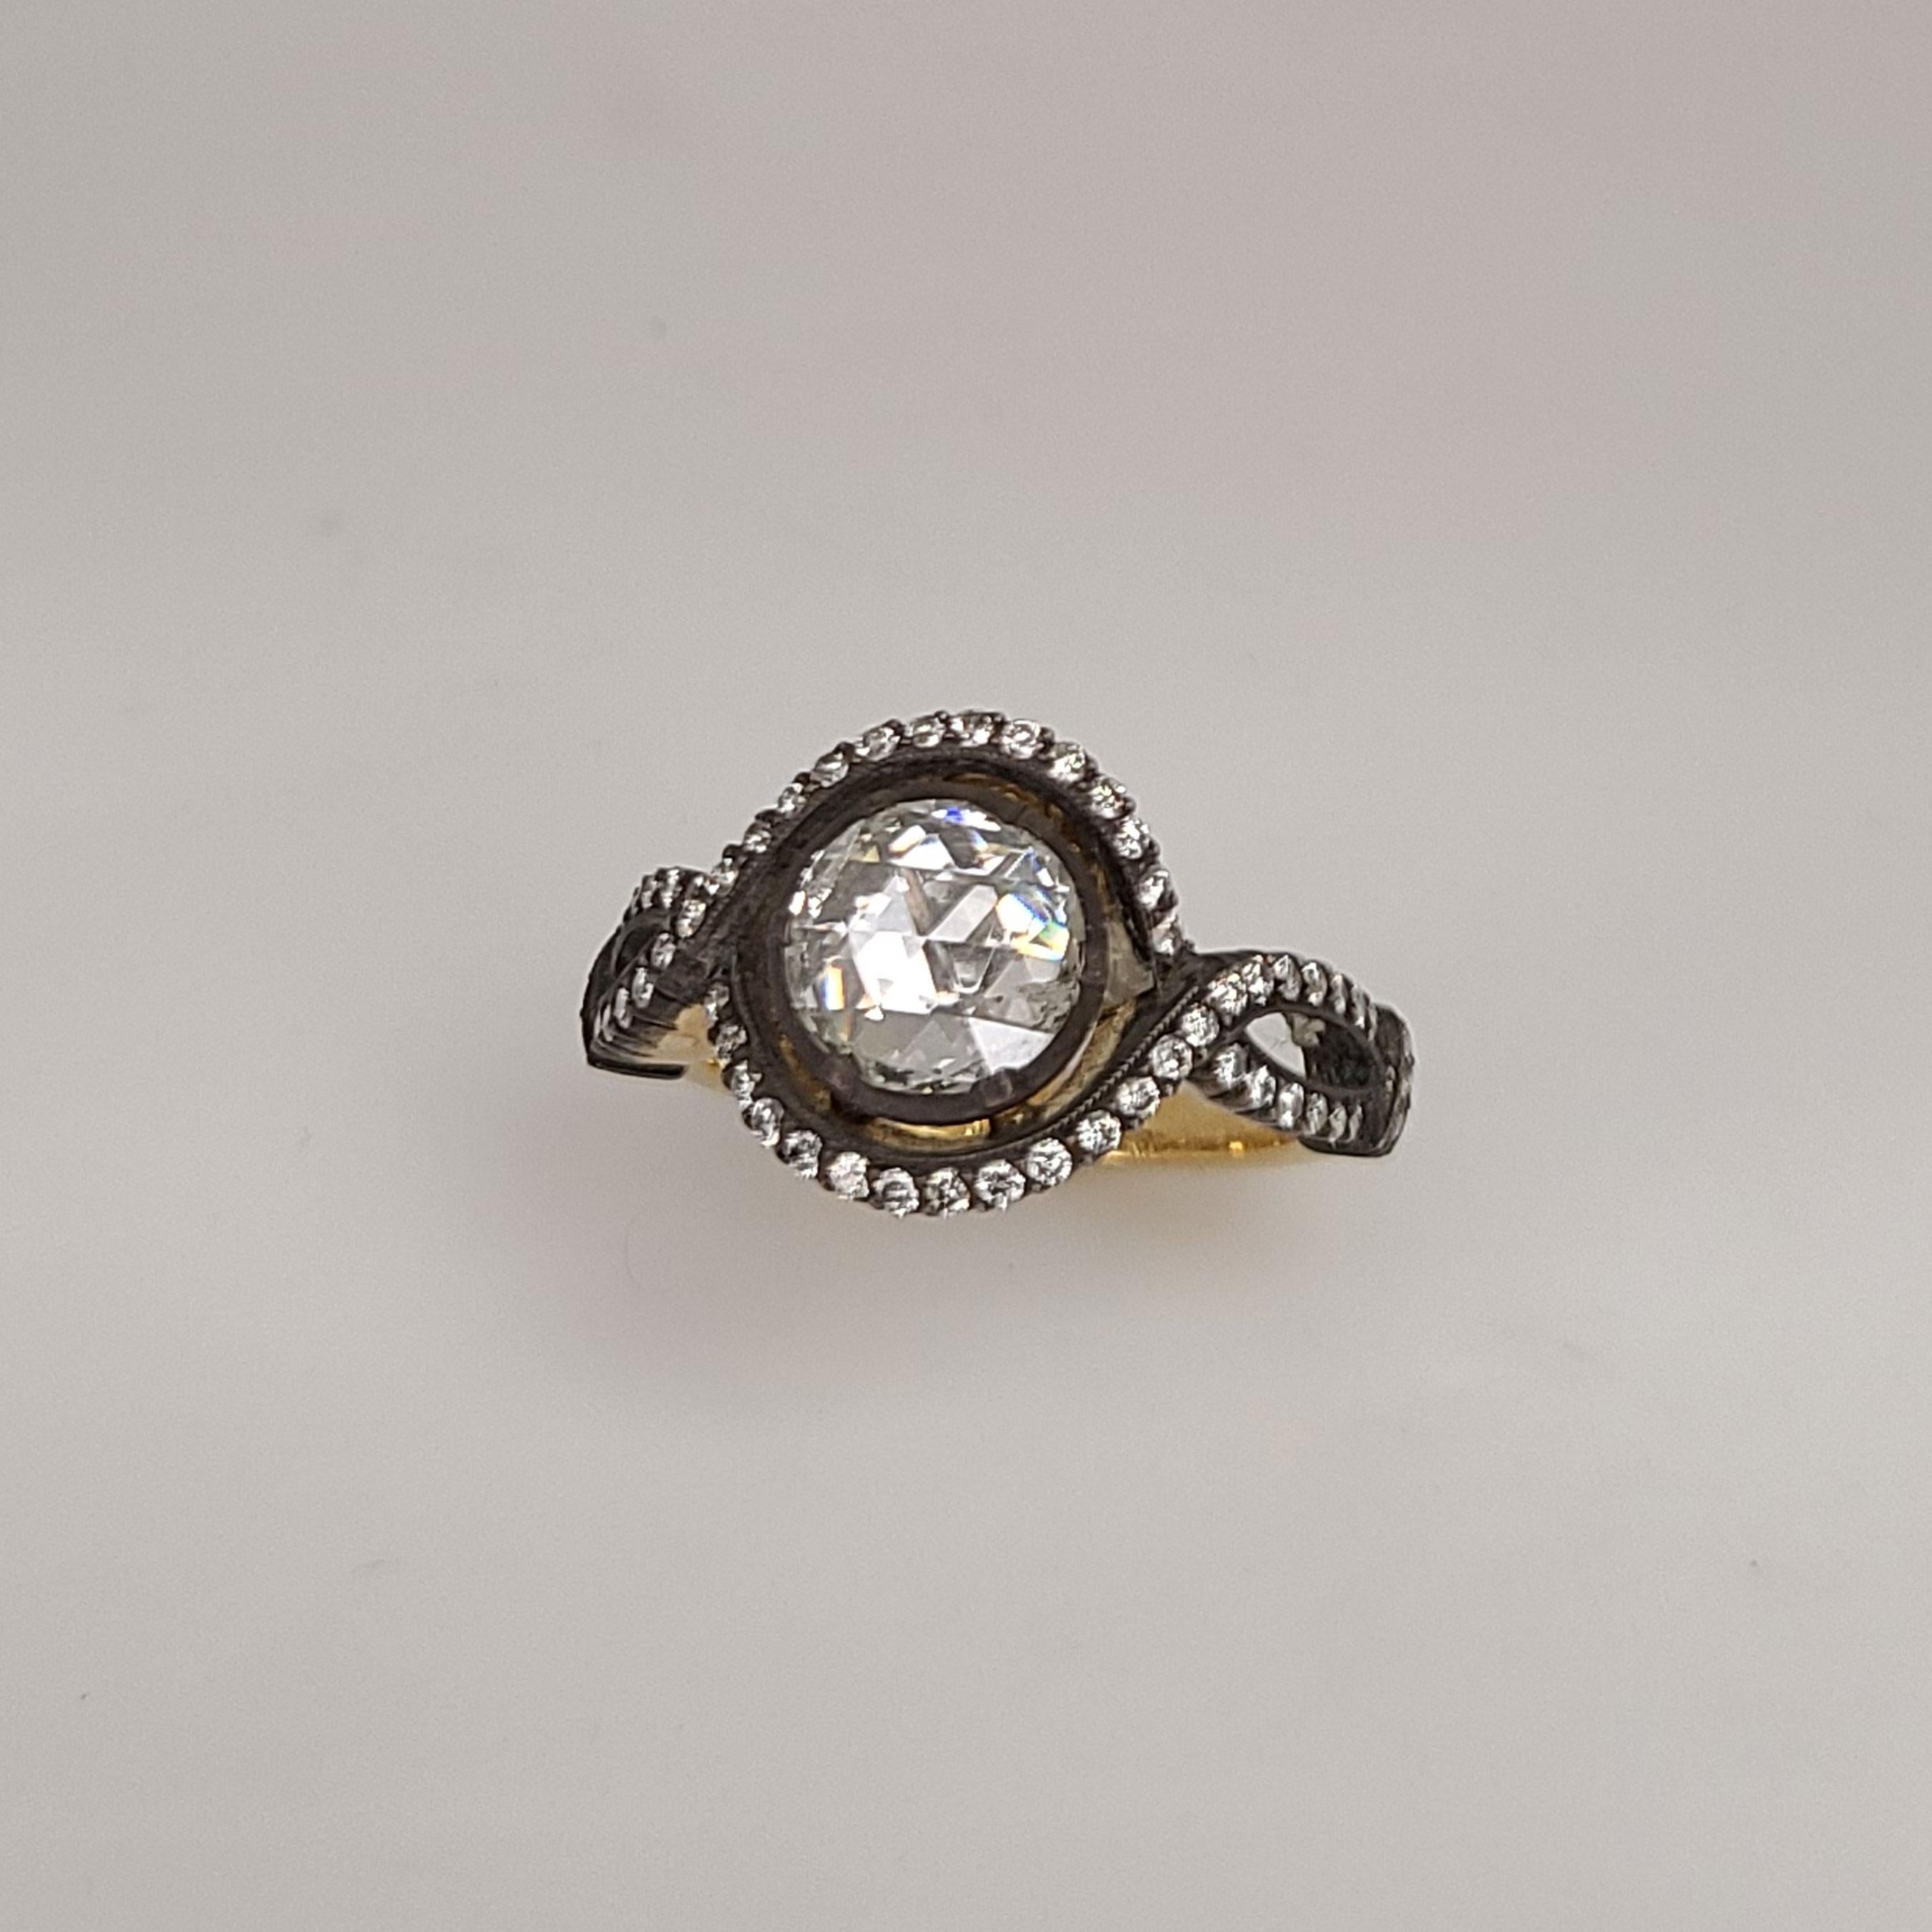 This is a one of a kind 18K Gold Ring and it has 1 center rose-cut Diamond of 1.21cts on top of the ring. The Diamonds complementing the rose-cut center Diamond are round brilliants of 0.41cts. This ring is 6.75 in size as is and can be resized upon